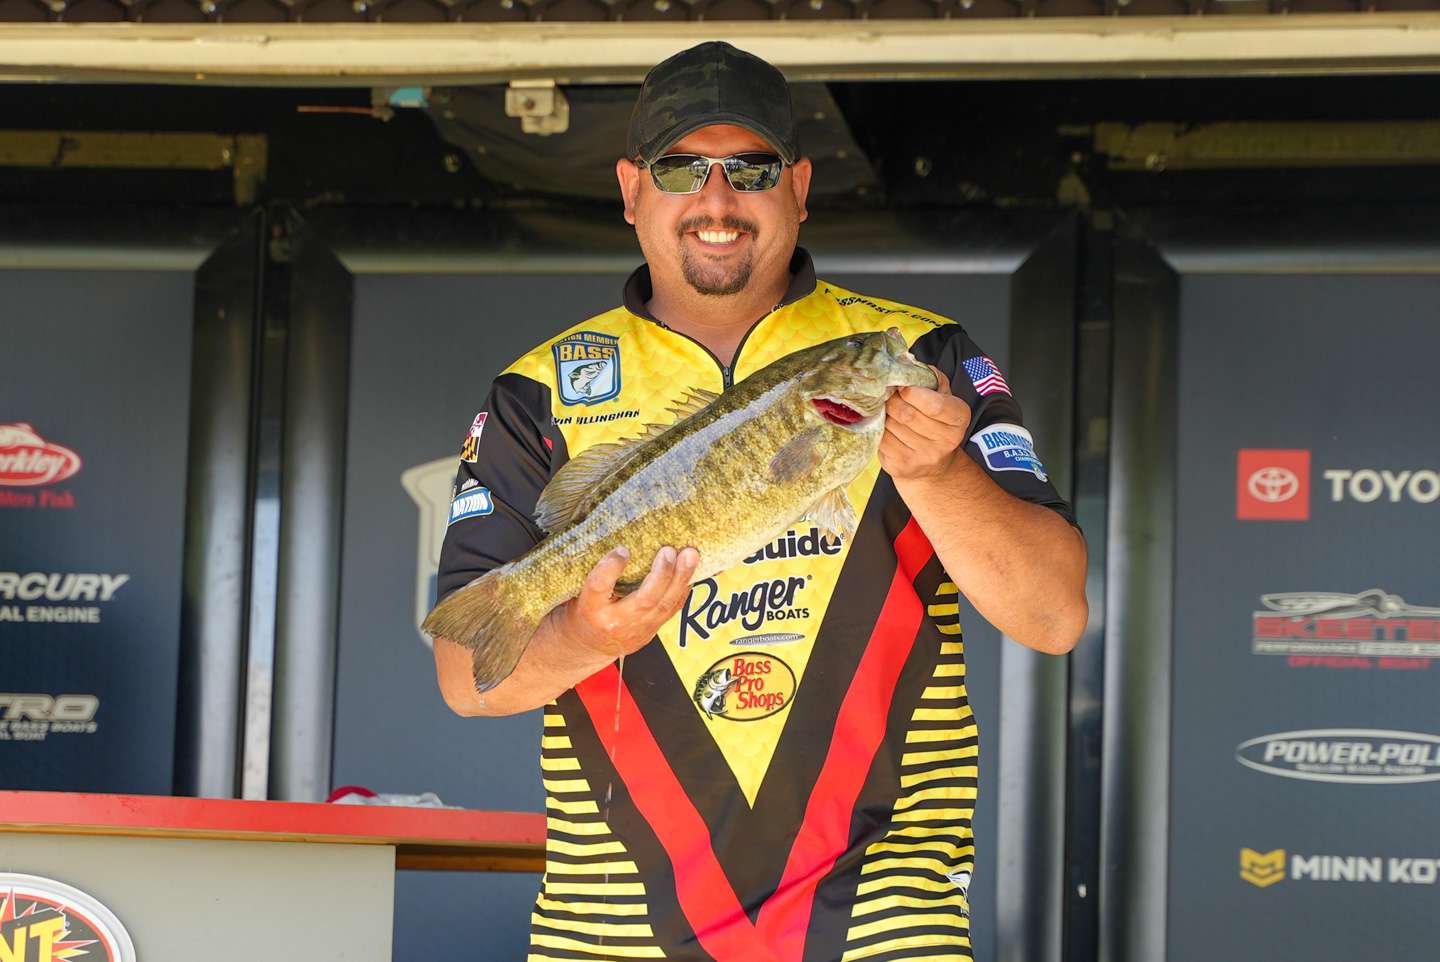 Kevin WIllinghan, Maryland, (61st, 5-0) (Non boater)